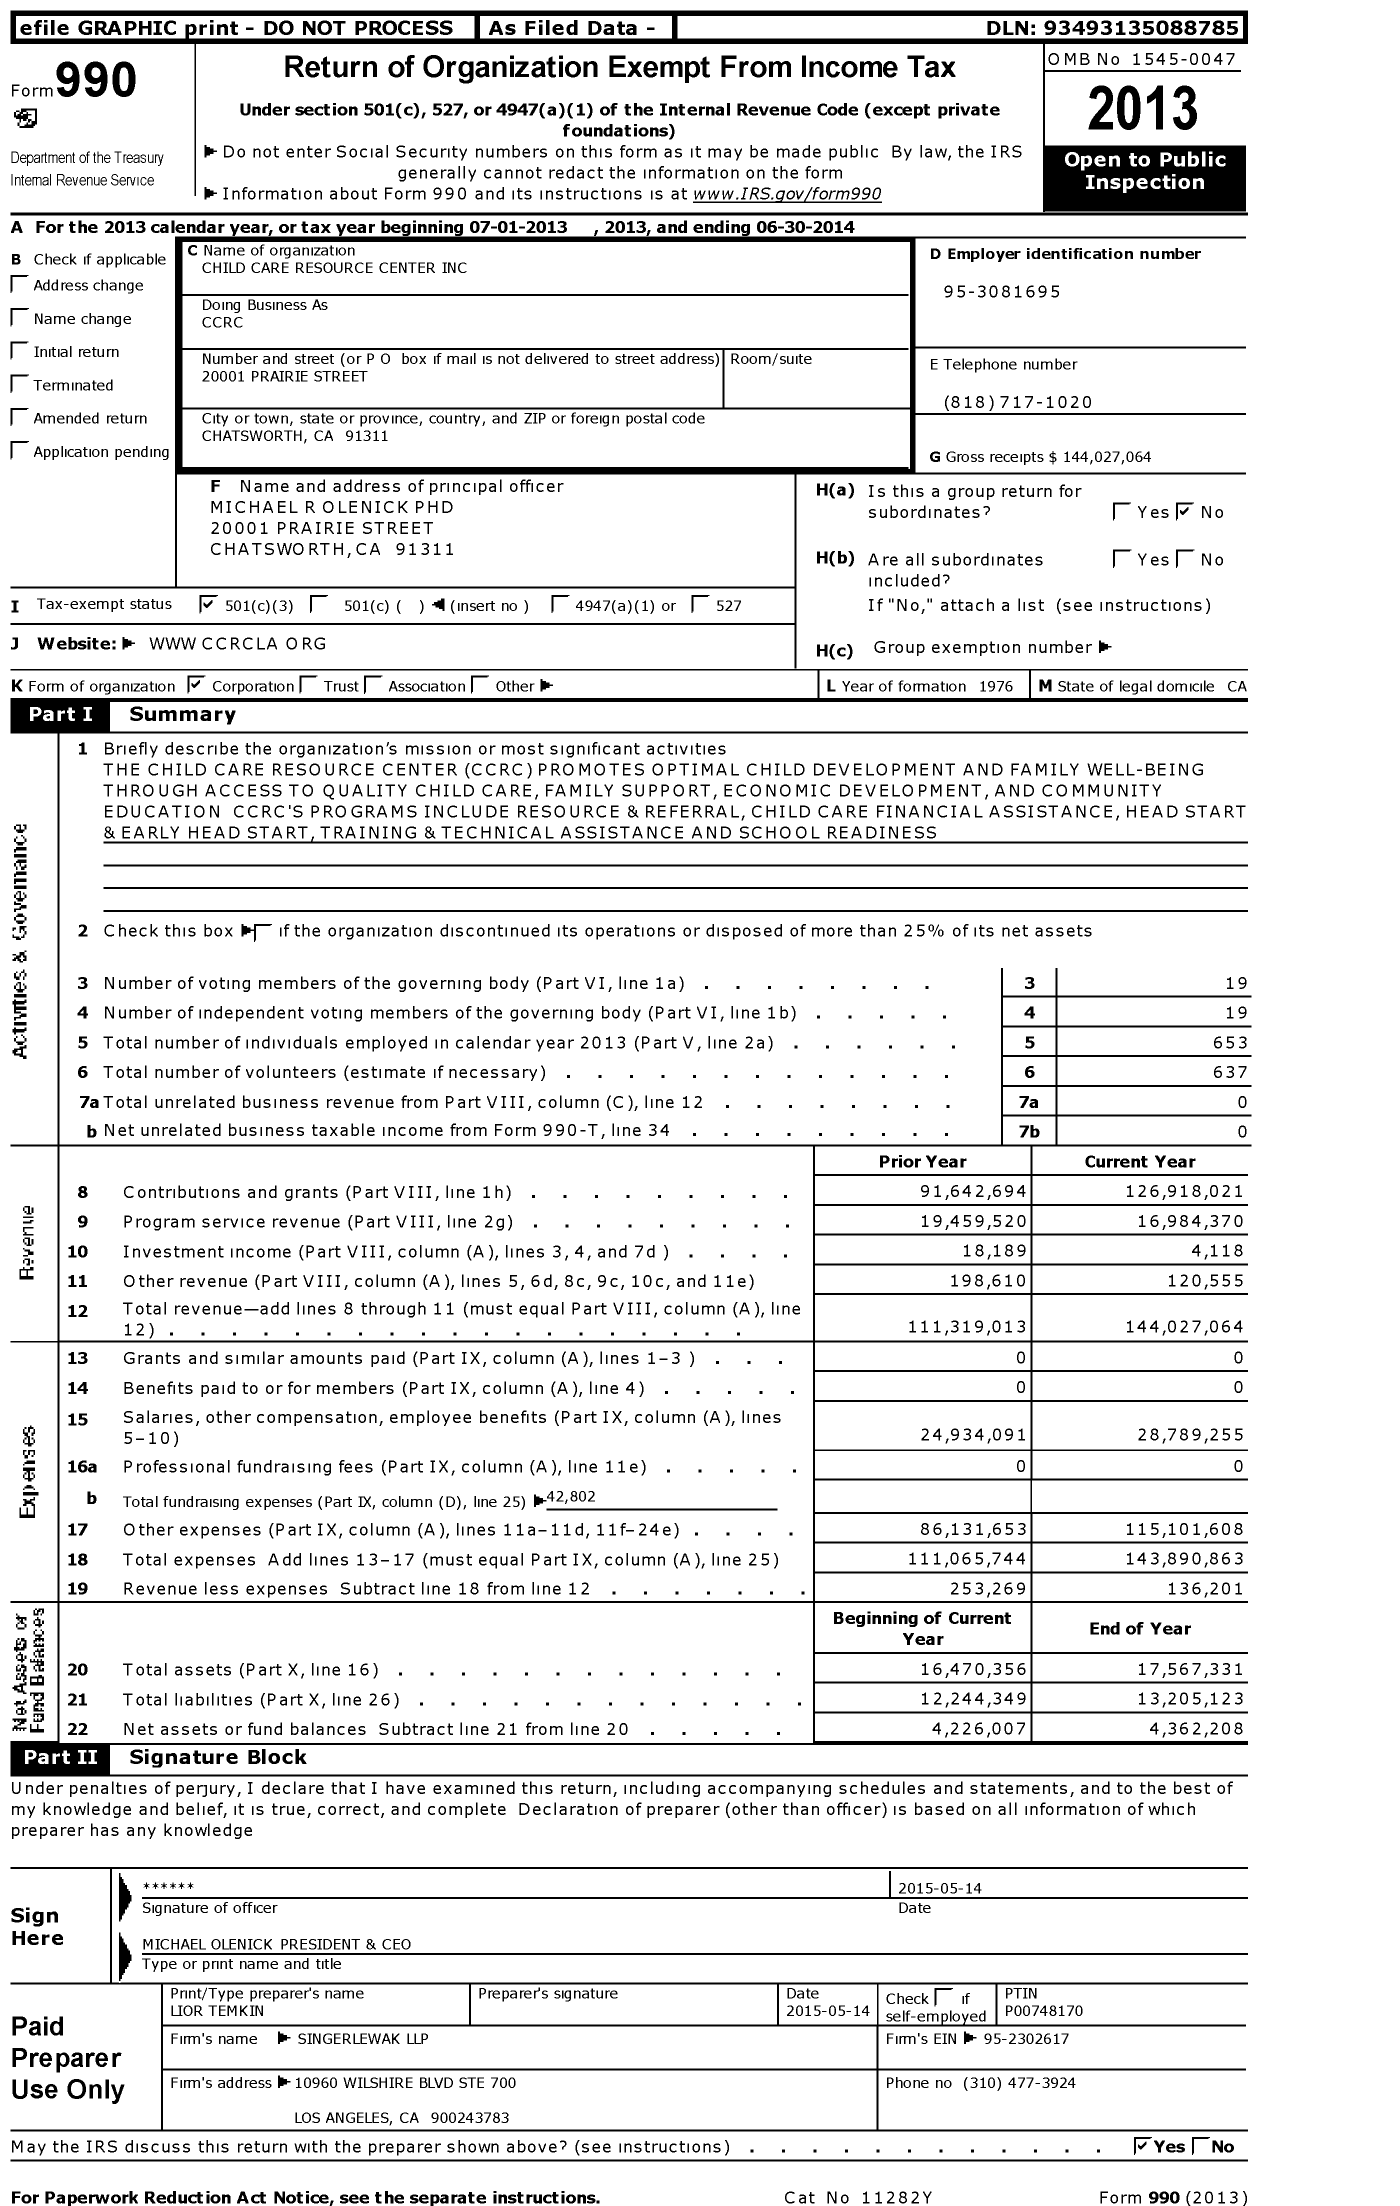 Image of first page of 2013 Form 990 for Child Care Resource Center (CCRC)